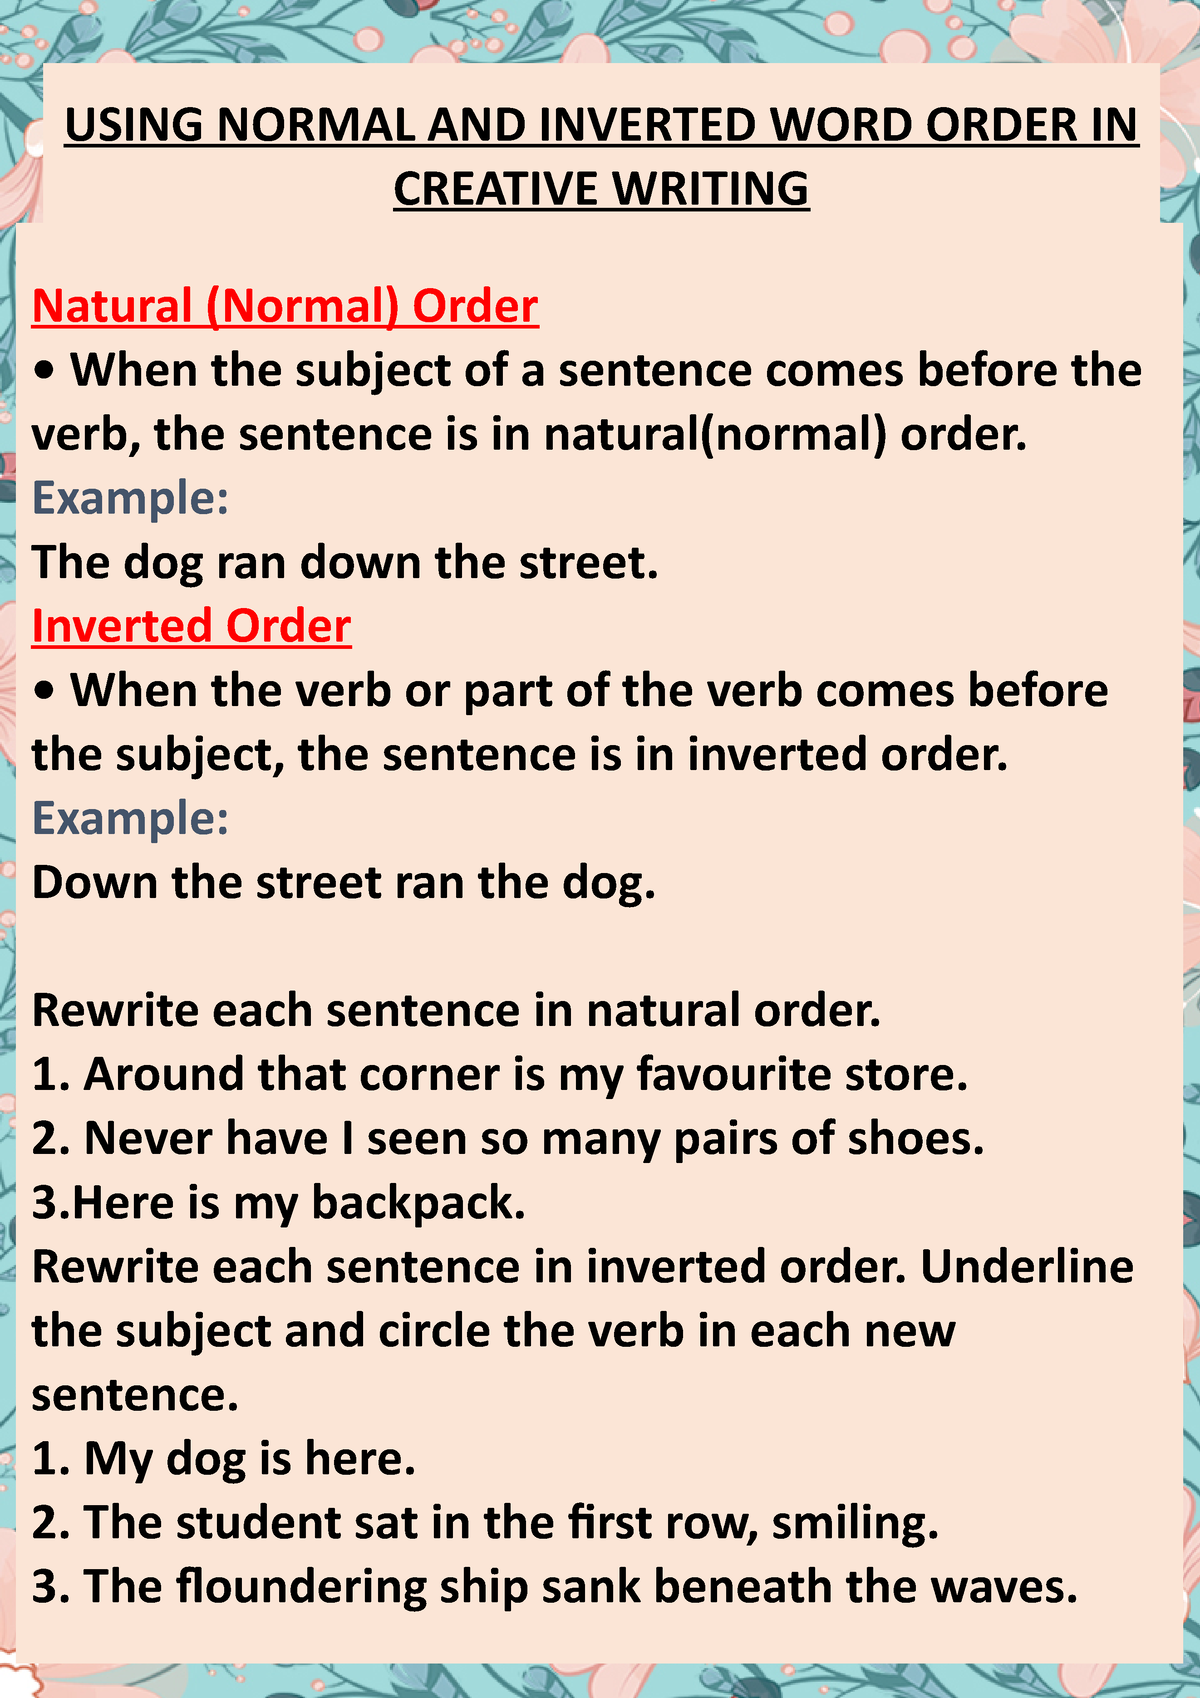 inverted-normal-word-order-grade-9-visuals-using-normal-and-inverted-word-order-in-creative